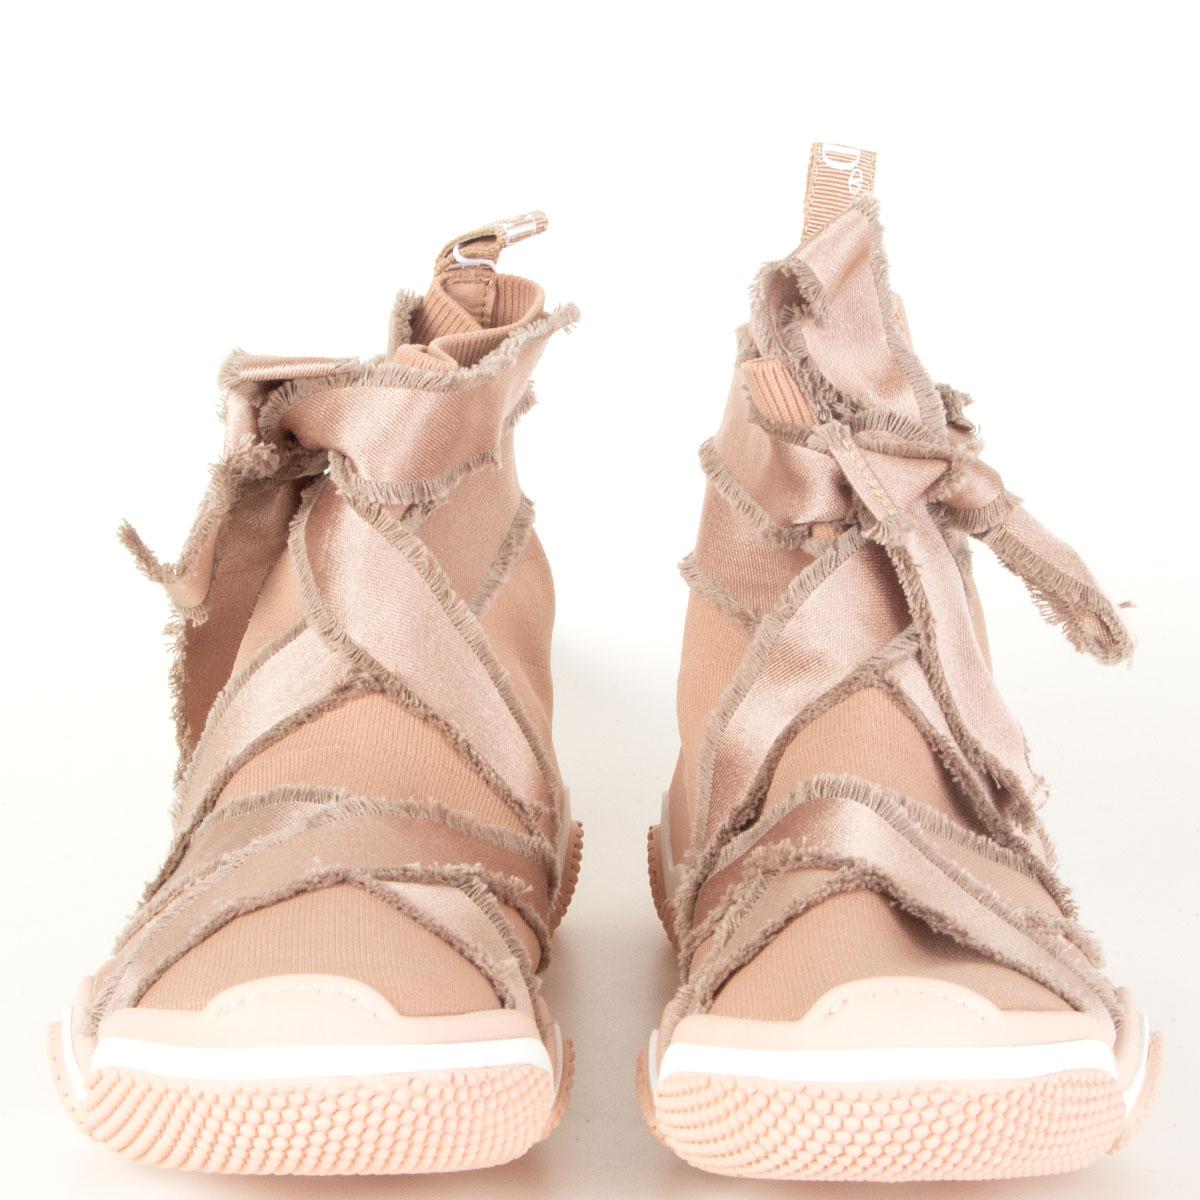 RED by Valentino 'Glam Run' sock high-top sneakers in nude stretch knit with sleek fringed ribbons inspired by the traditional ballet shoe. Grosgrain ribbon with printed logo “REDV” on the heel. Lightweight and flexible rubber sole. Brand new. Come